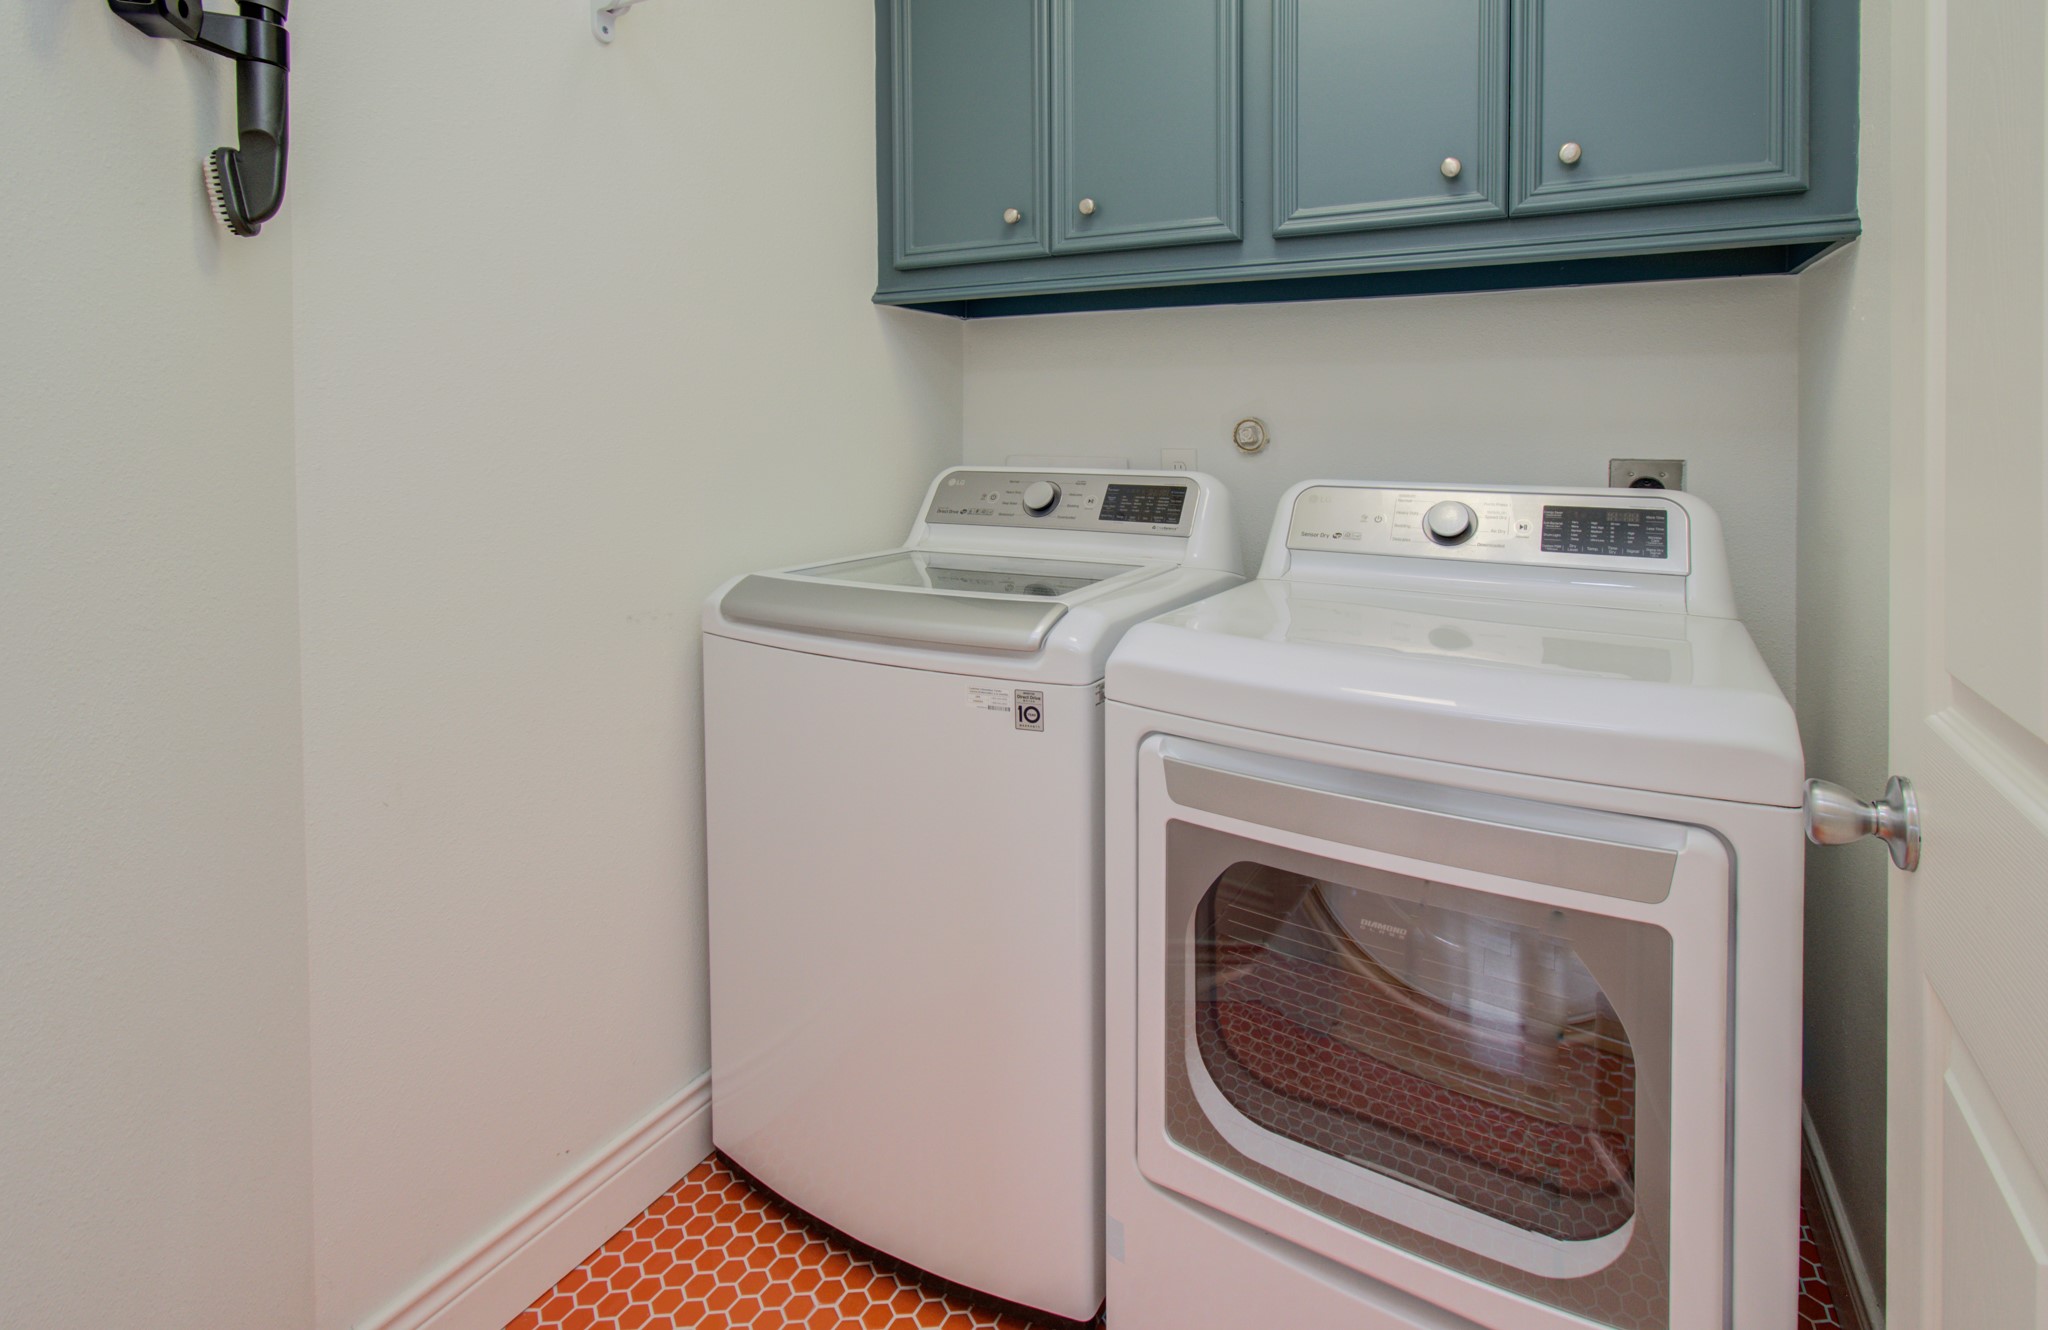 The utility room is conveniently situated on the second floor for easy access and practicality.